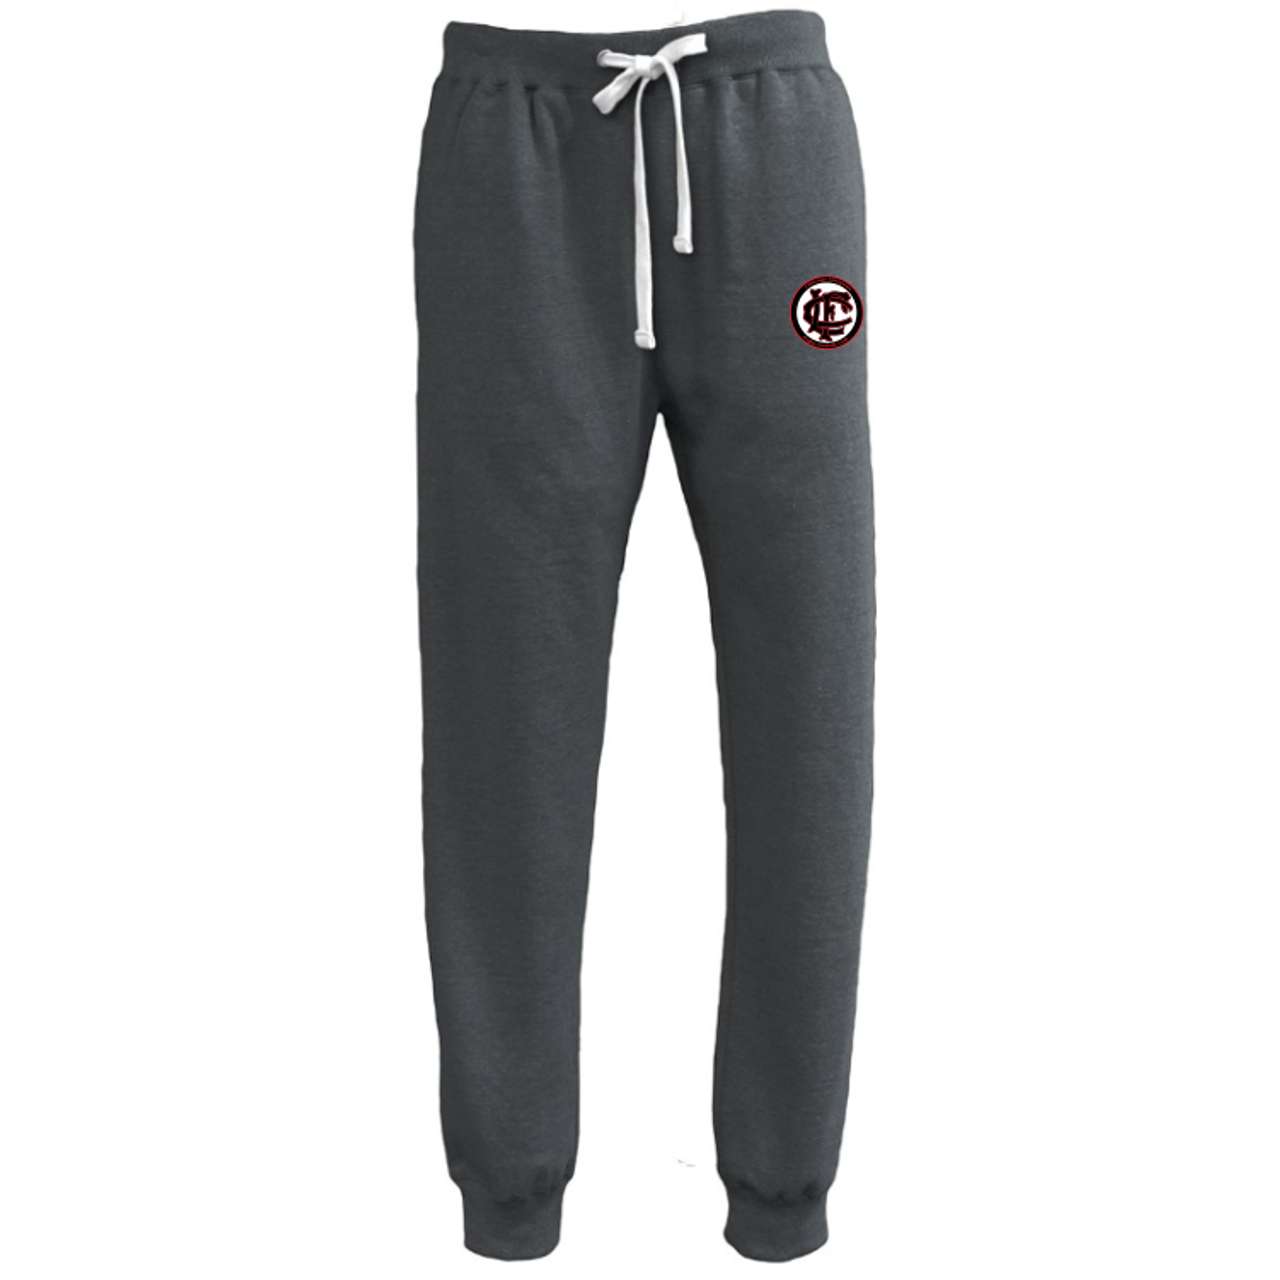 Chicago Lawyers Jogger Sweatpant